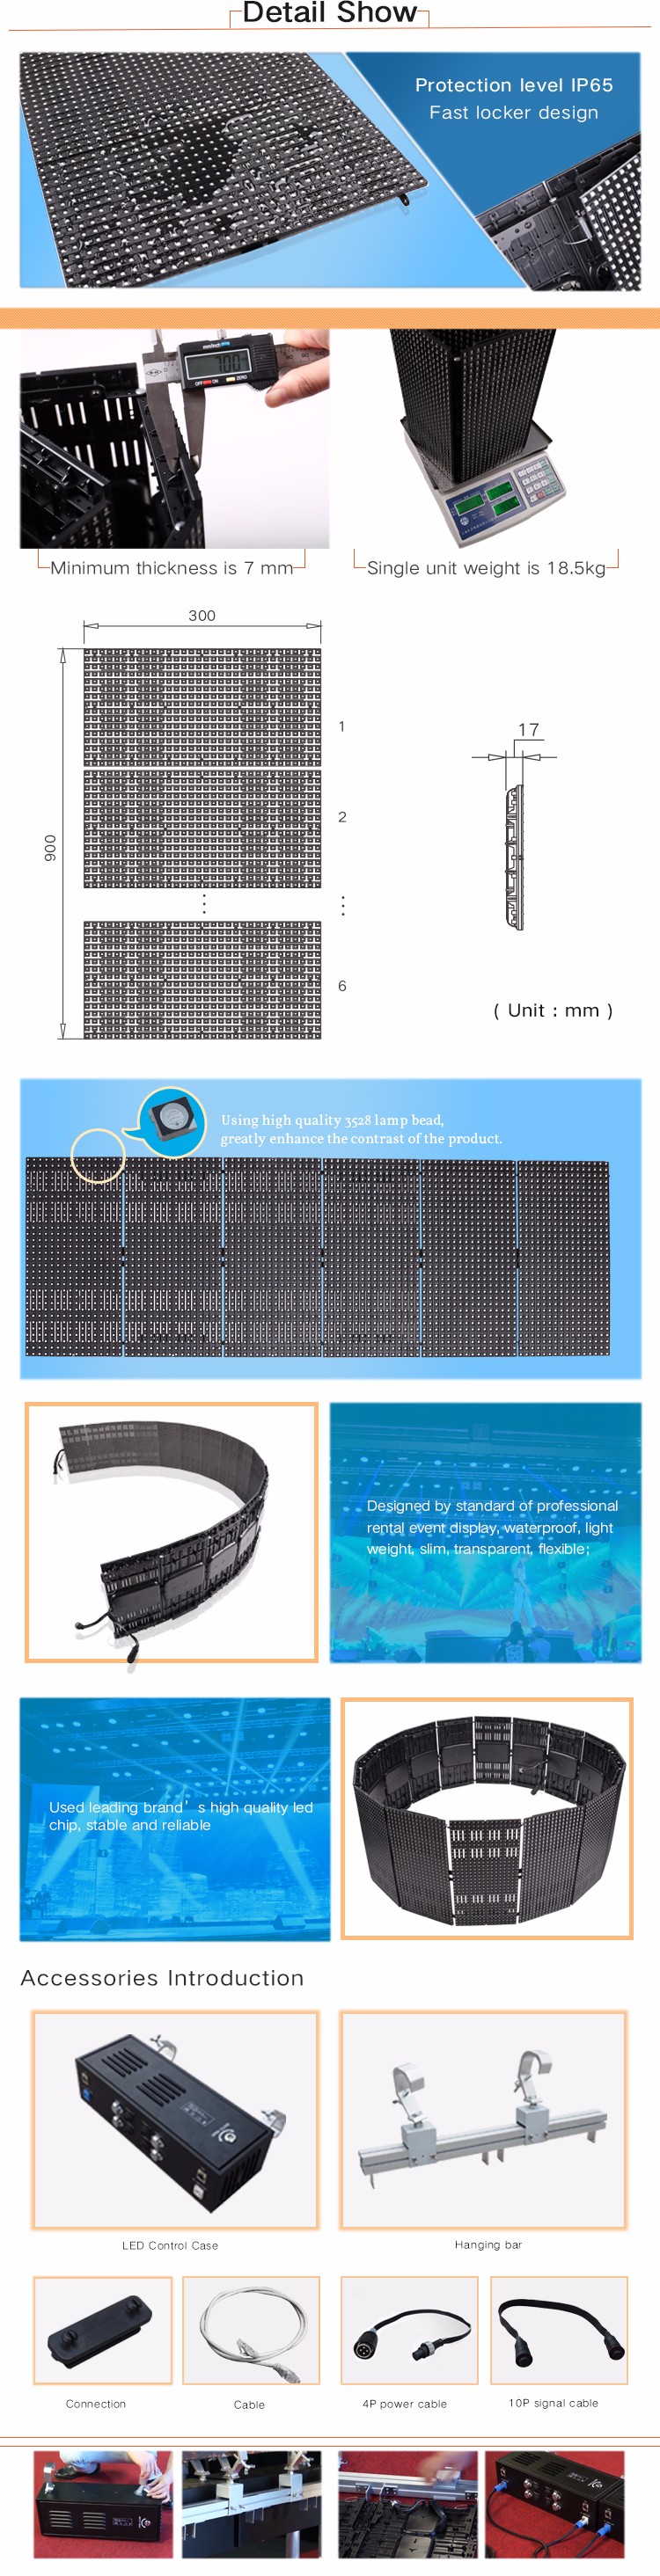 2020 new p9 outdoor flexible led screen curtain